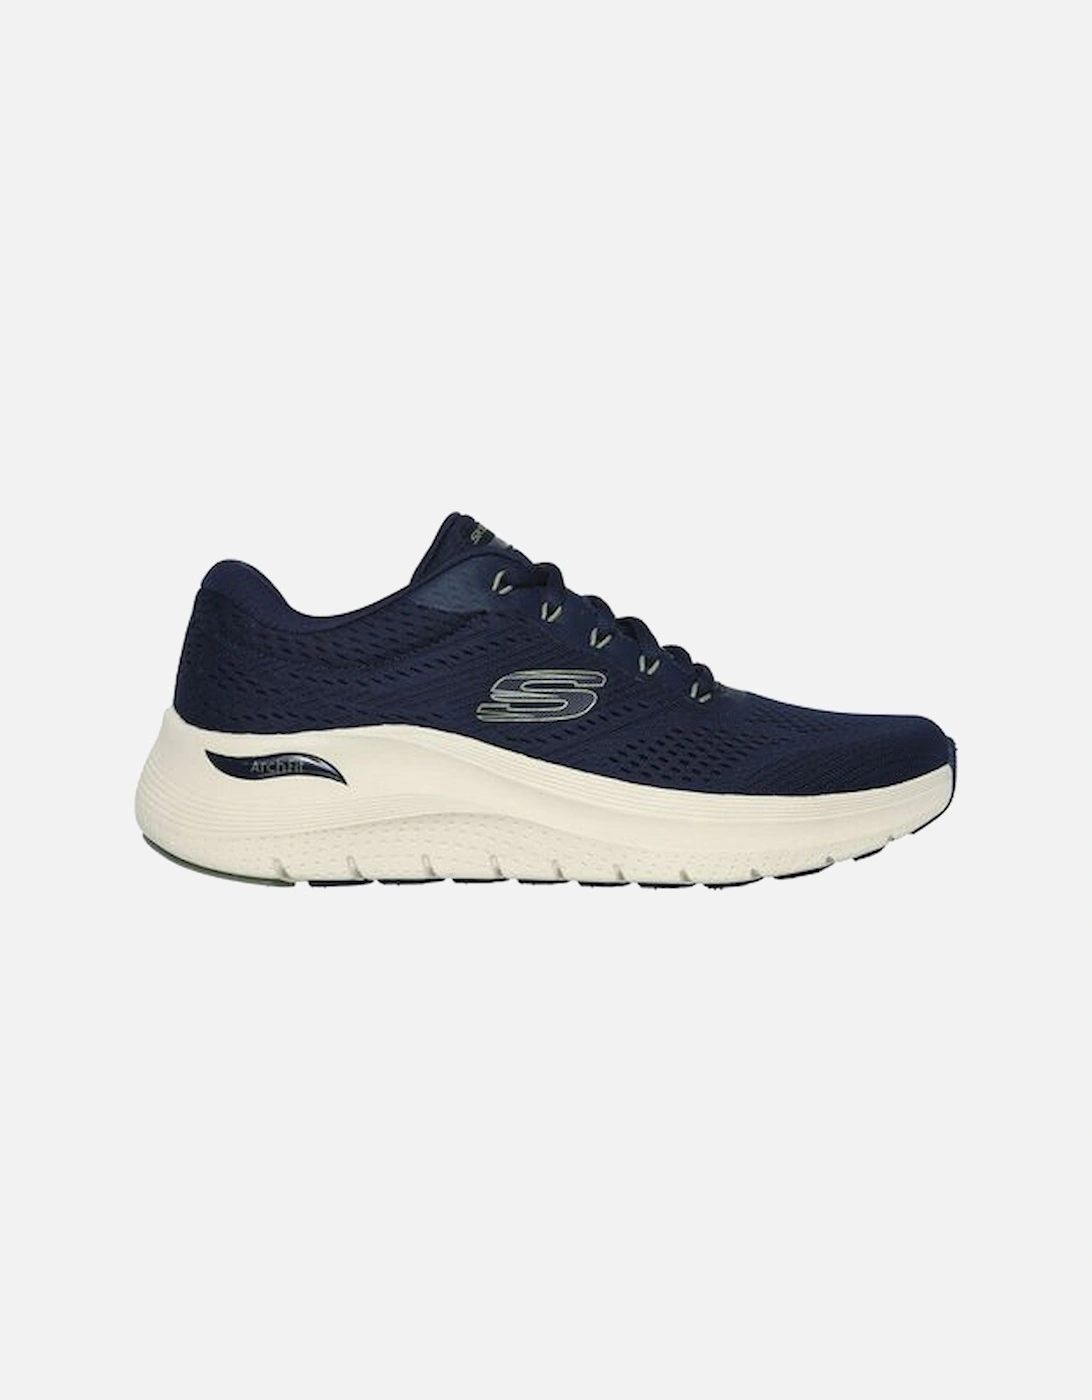 232700 Arch Fit 2.0 in Navy, 2 of 1